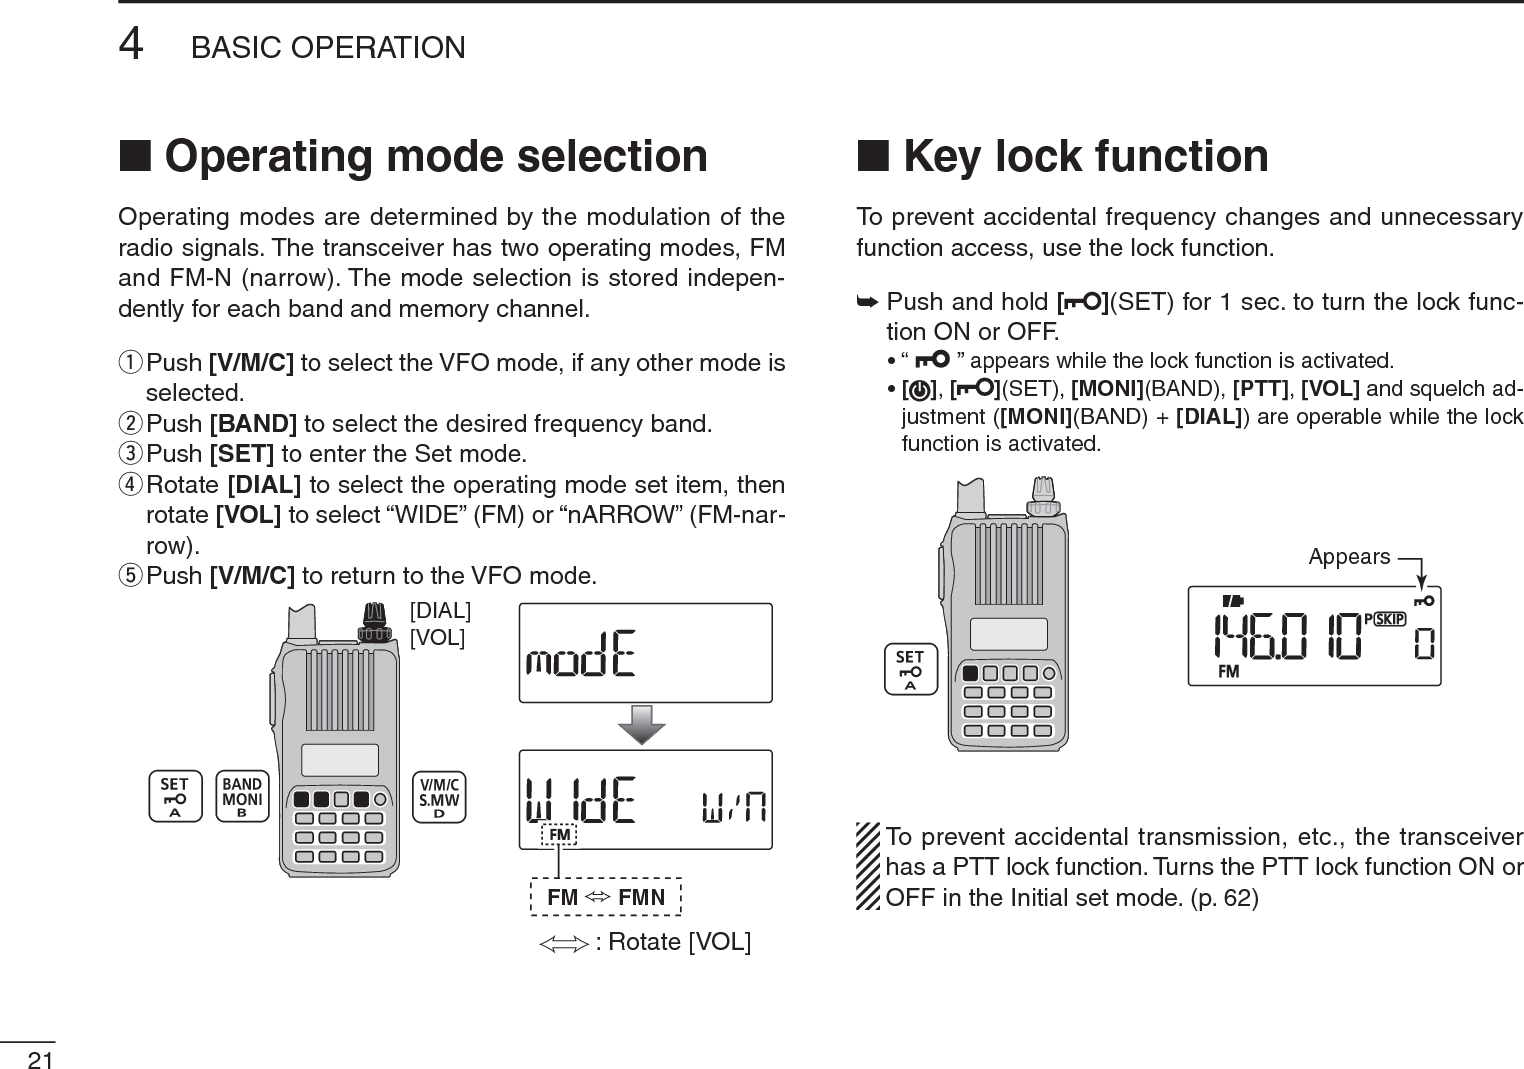 N Operating mode selectionOperating modes are determined by the modulation of the radio signals. The transceiver has two operating modes, FM and FM-N (narrow). The mode selection is stored indepen-dently for each band and memory channel.q  Push [V/M/C] to select the VFO mode, if any other mode is selected.w  Push [BAND] to select the desired frequency band.e  Push [SET] to enter the Set mode.r  Rotate [DIAL] to select the operating mode set item, then rotate [VOL] to select “WIDE” (FM) or “nARROW” (FM-nar-row).tPush [V/M/C] to return to the VFO mode.[VOL][DIAL]: Rotate [VOL]FM FMNN Key lock functionTo prevent accidental frequency changes and unnecessary function access, use the lock function. ±Push and hold [](SET) for 1 sec. to turn the lock func-tion ON or OFF.• “   ” appears while the lock function is activated.•[],[ ](SET), [MONI](BAND), [PTT],[VOL] and squelch ad-justment ([MONI](BAND) + [DIAL]) are operable while the lock function is activated.AppearsTo prevent accidental transmission, etc., the transceiver has a PTT lock function. Turns the PTT lock function ON or OFF in the Initial set mode. (p. 62)214BASIC OPERATION